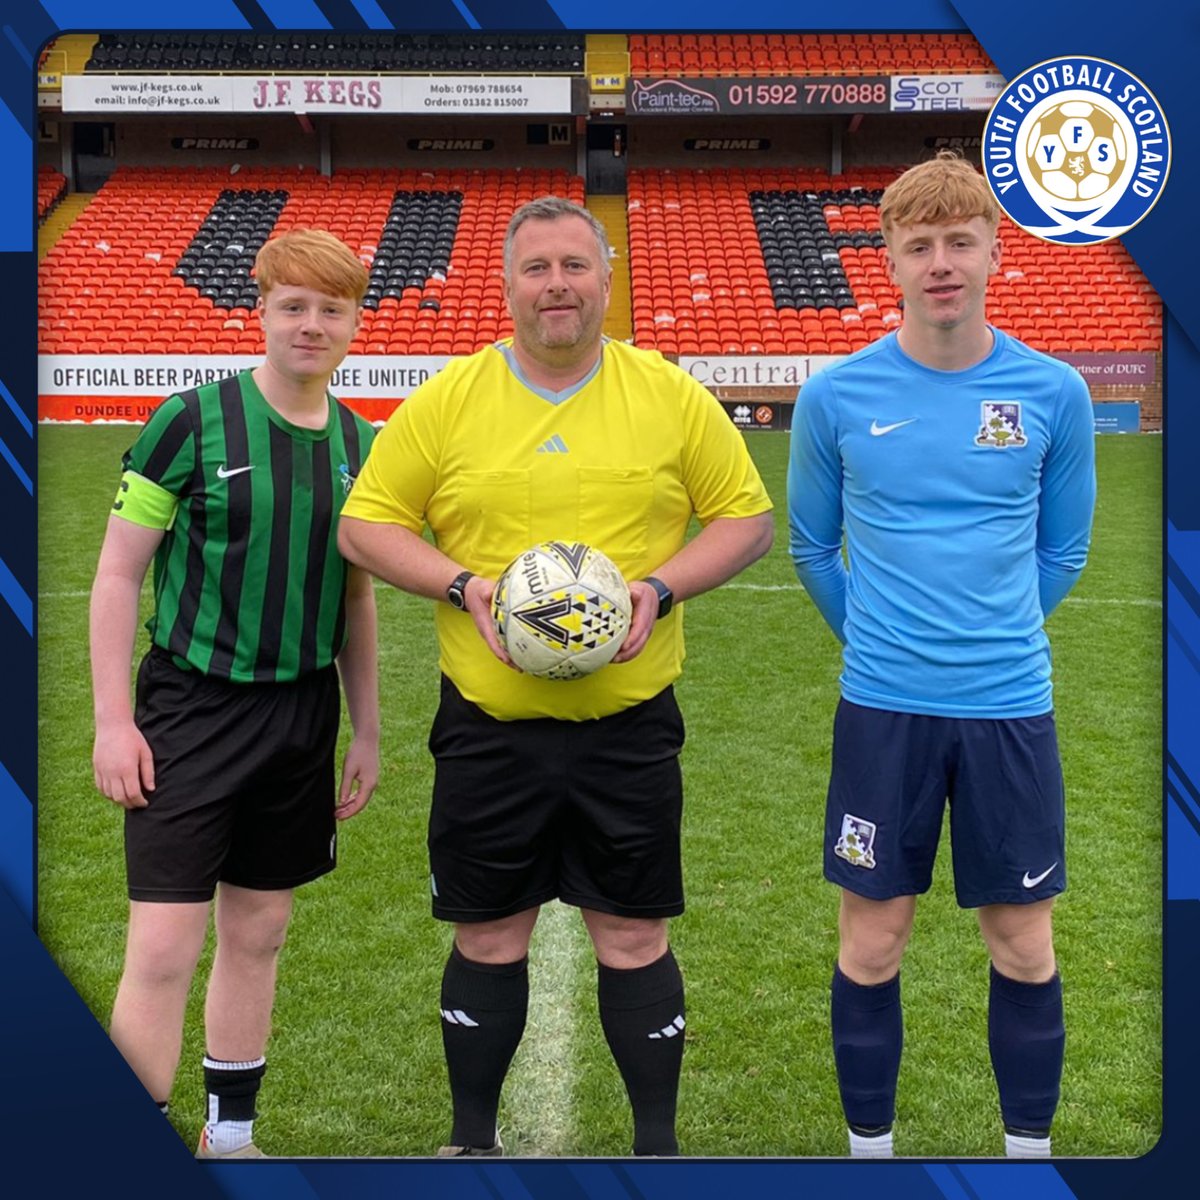 𝗖𝗨𝗣 𝗙𝗜𝗡𝗔𝗟 𝗖𝗢𝗩𝗘𝗥𝗔𝗚𝗘 🏆🎙️ YFS's 𝘼𝙧𝙘𝙝𝙞𝙚 𝘼𝙣𝙙𝙚𝙧𝙨𝙤𝙣 is at Tannadice Park for the U16 Dundee United Cup Final between @GroveAcPE and @stpaulsdundee. Stay tuned to the YFS socials for post-match reaction.